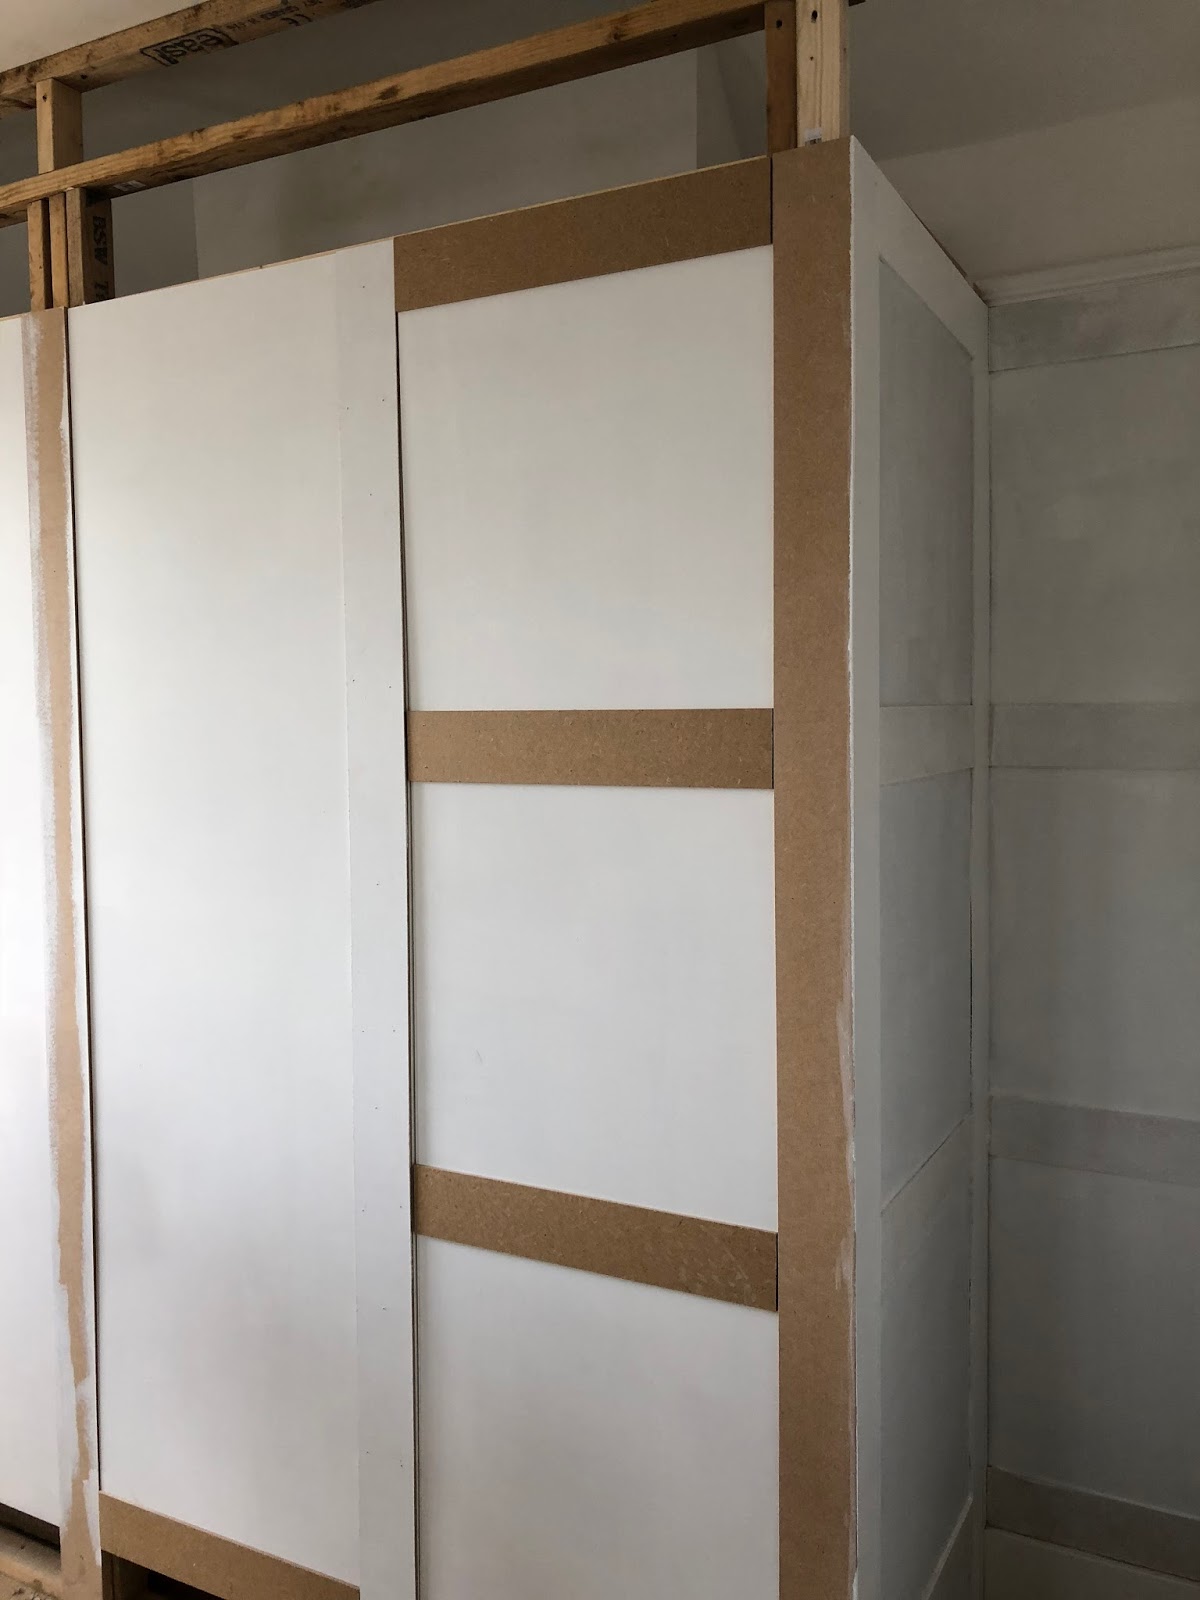 Interiors // Bedroom Renovations; Creating a Panelled Wall & Building ...